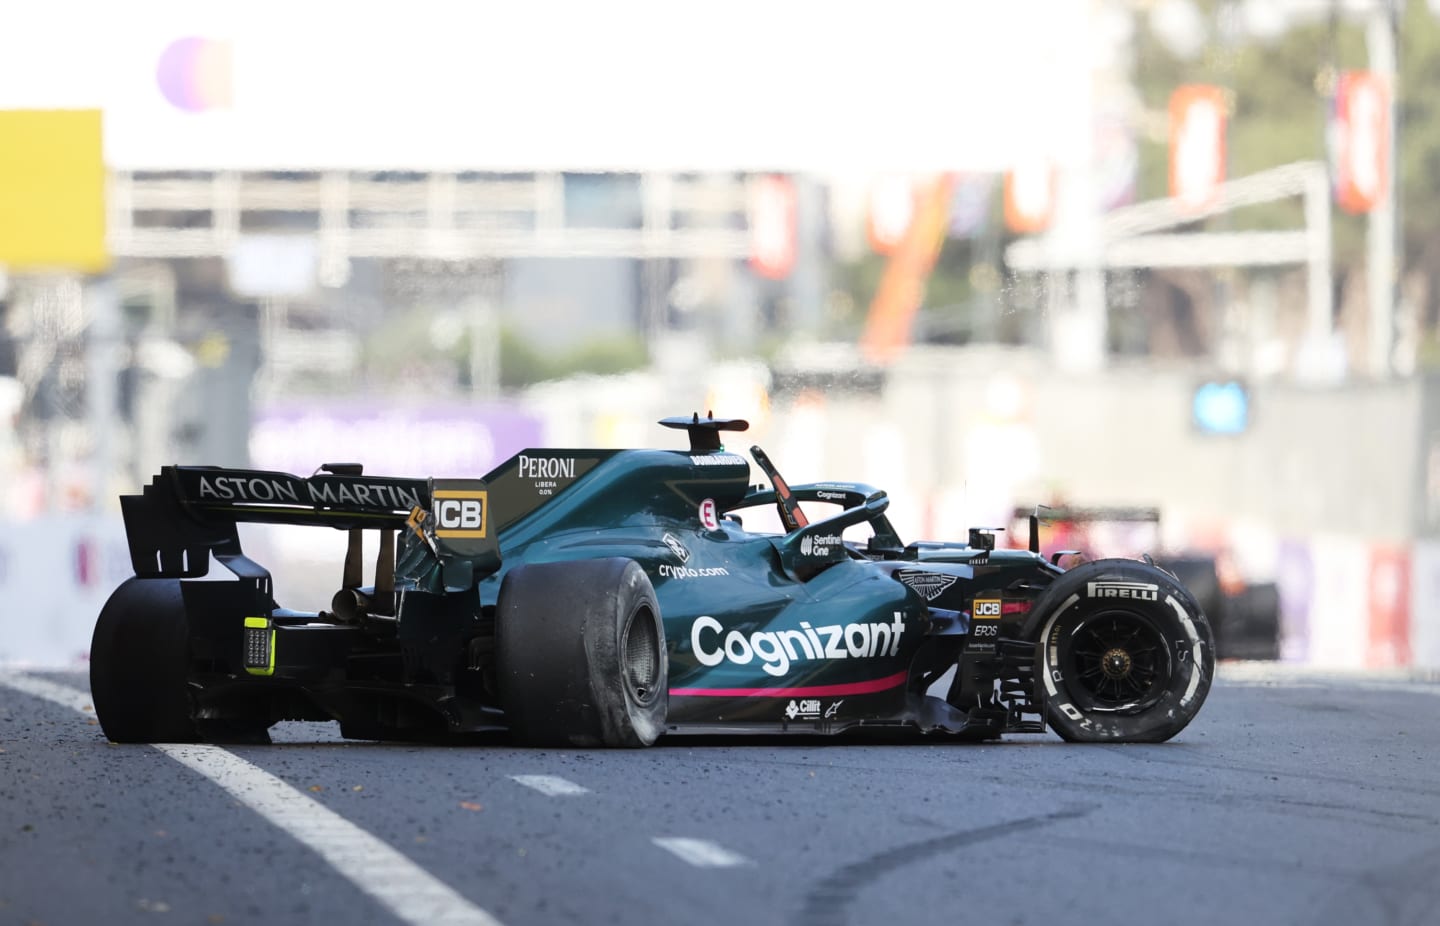 BAKU, AZERBAIJAN - JUNE 06: The broken car of Lance Stroll of Canada and Aston Martin F1 Team is seen on the track after a crash during the F1 Grand Prix of Azerbaijan at Baku City Circuit on June 06, 2021 in Baku, Azerbaijan. (Photo by Clive Rose/Getty Images)